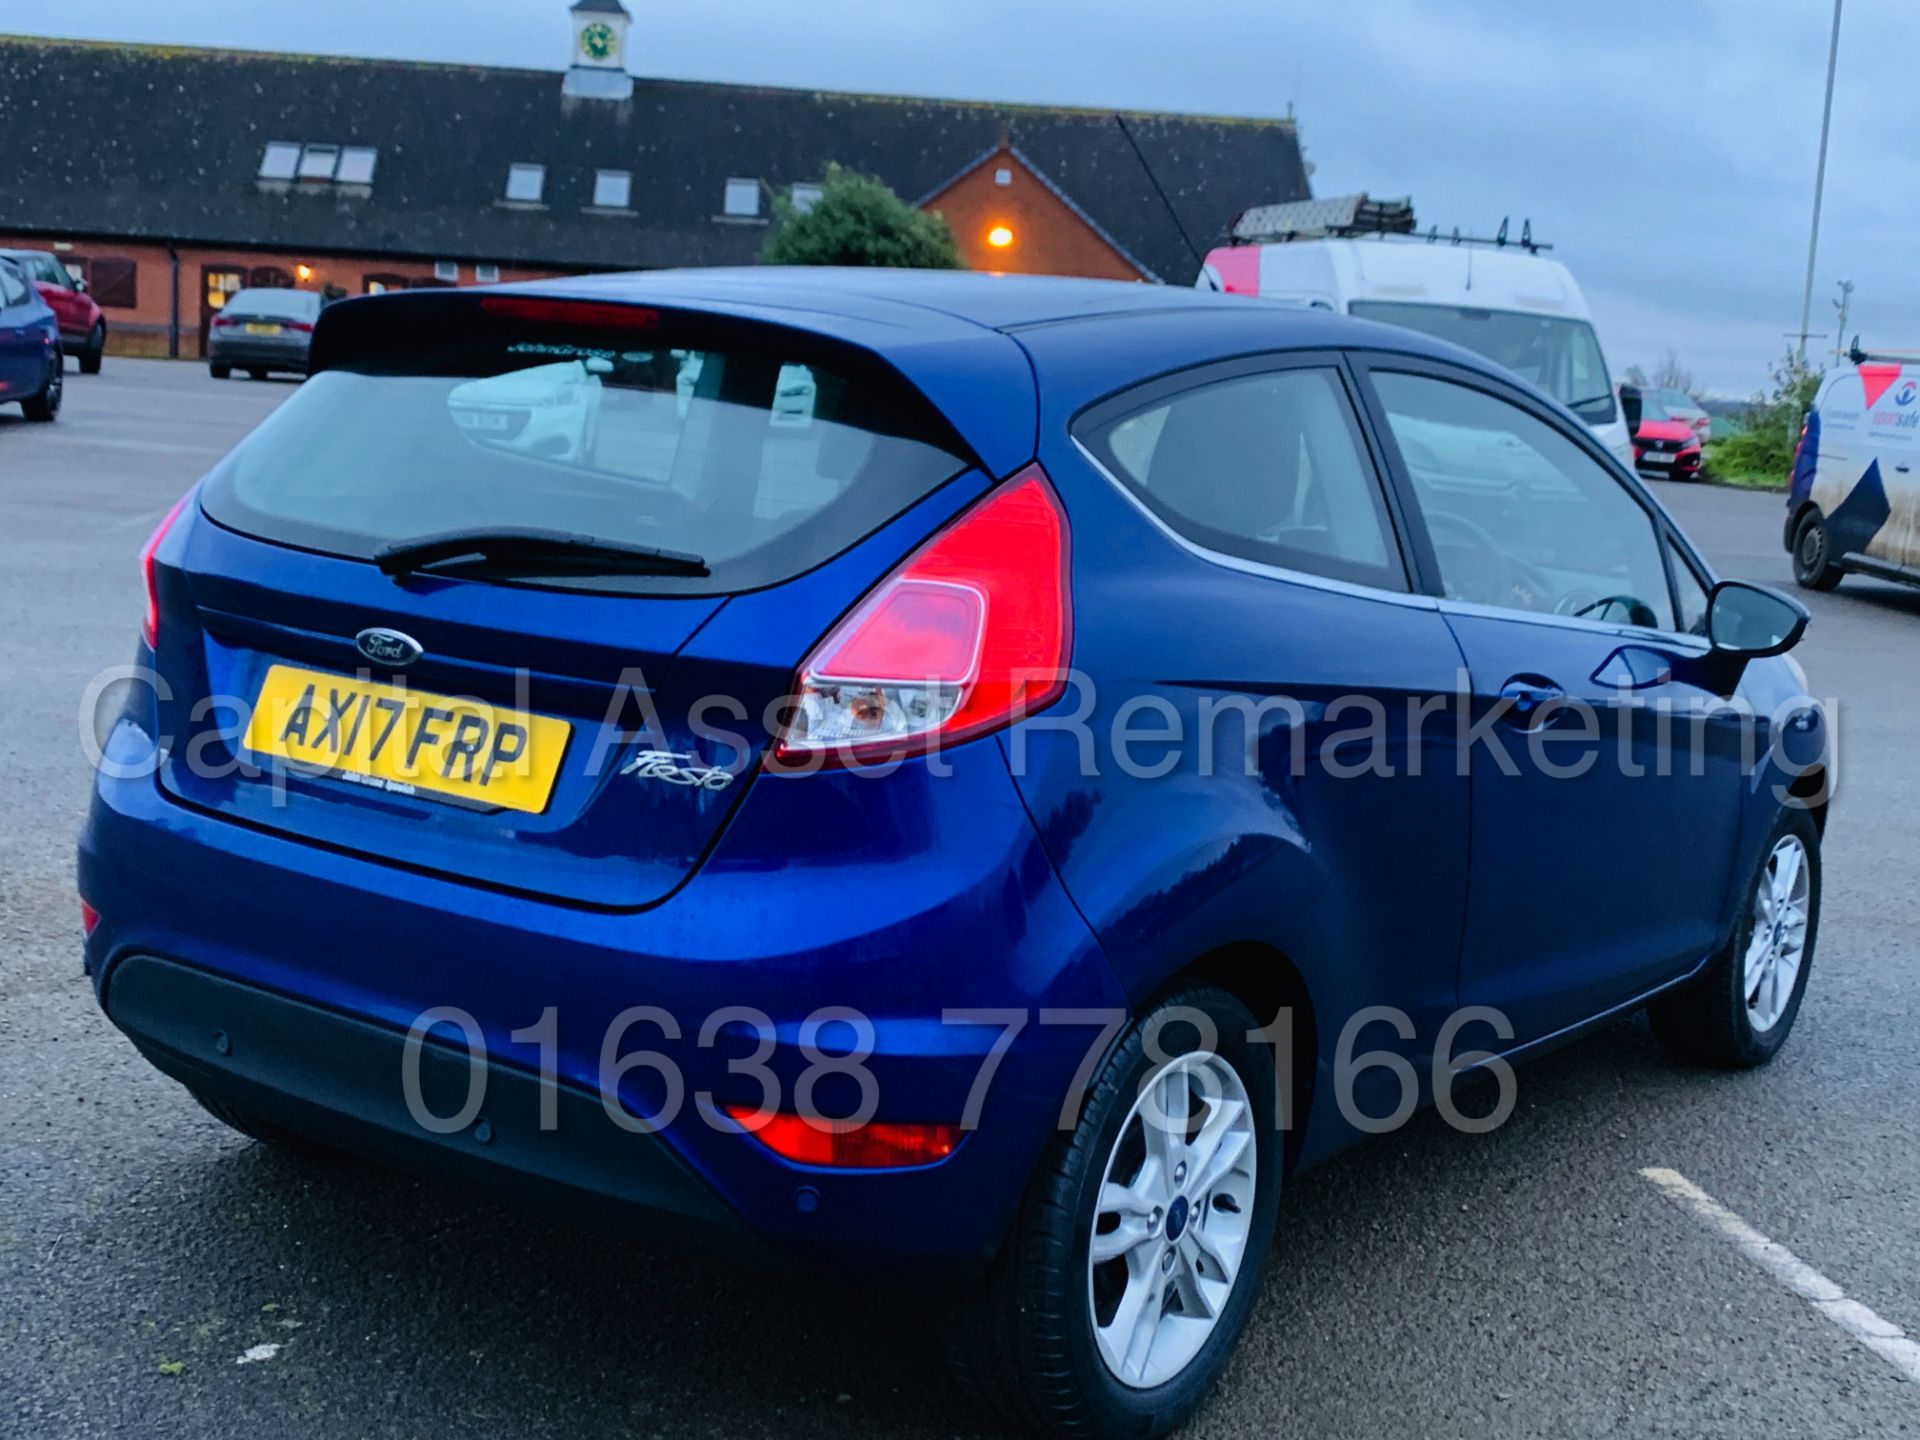 (On Sale) FORD FIESTA *ZETEC EDITION* (2017) '1.2 PETROL - 5 SPEED' *AIR CON & SAT NAV* 17,000 MILES - Image 7 of 40